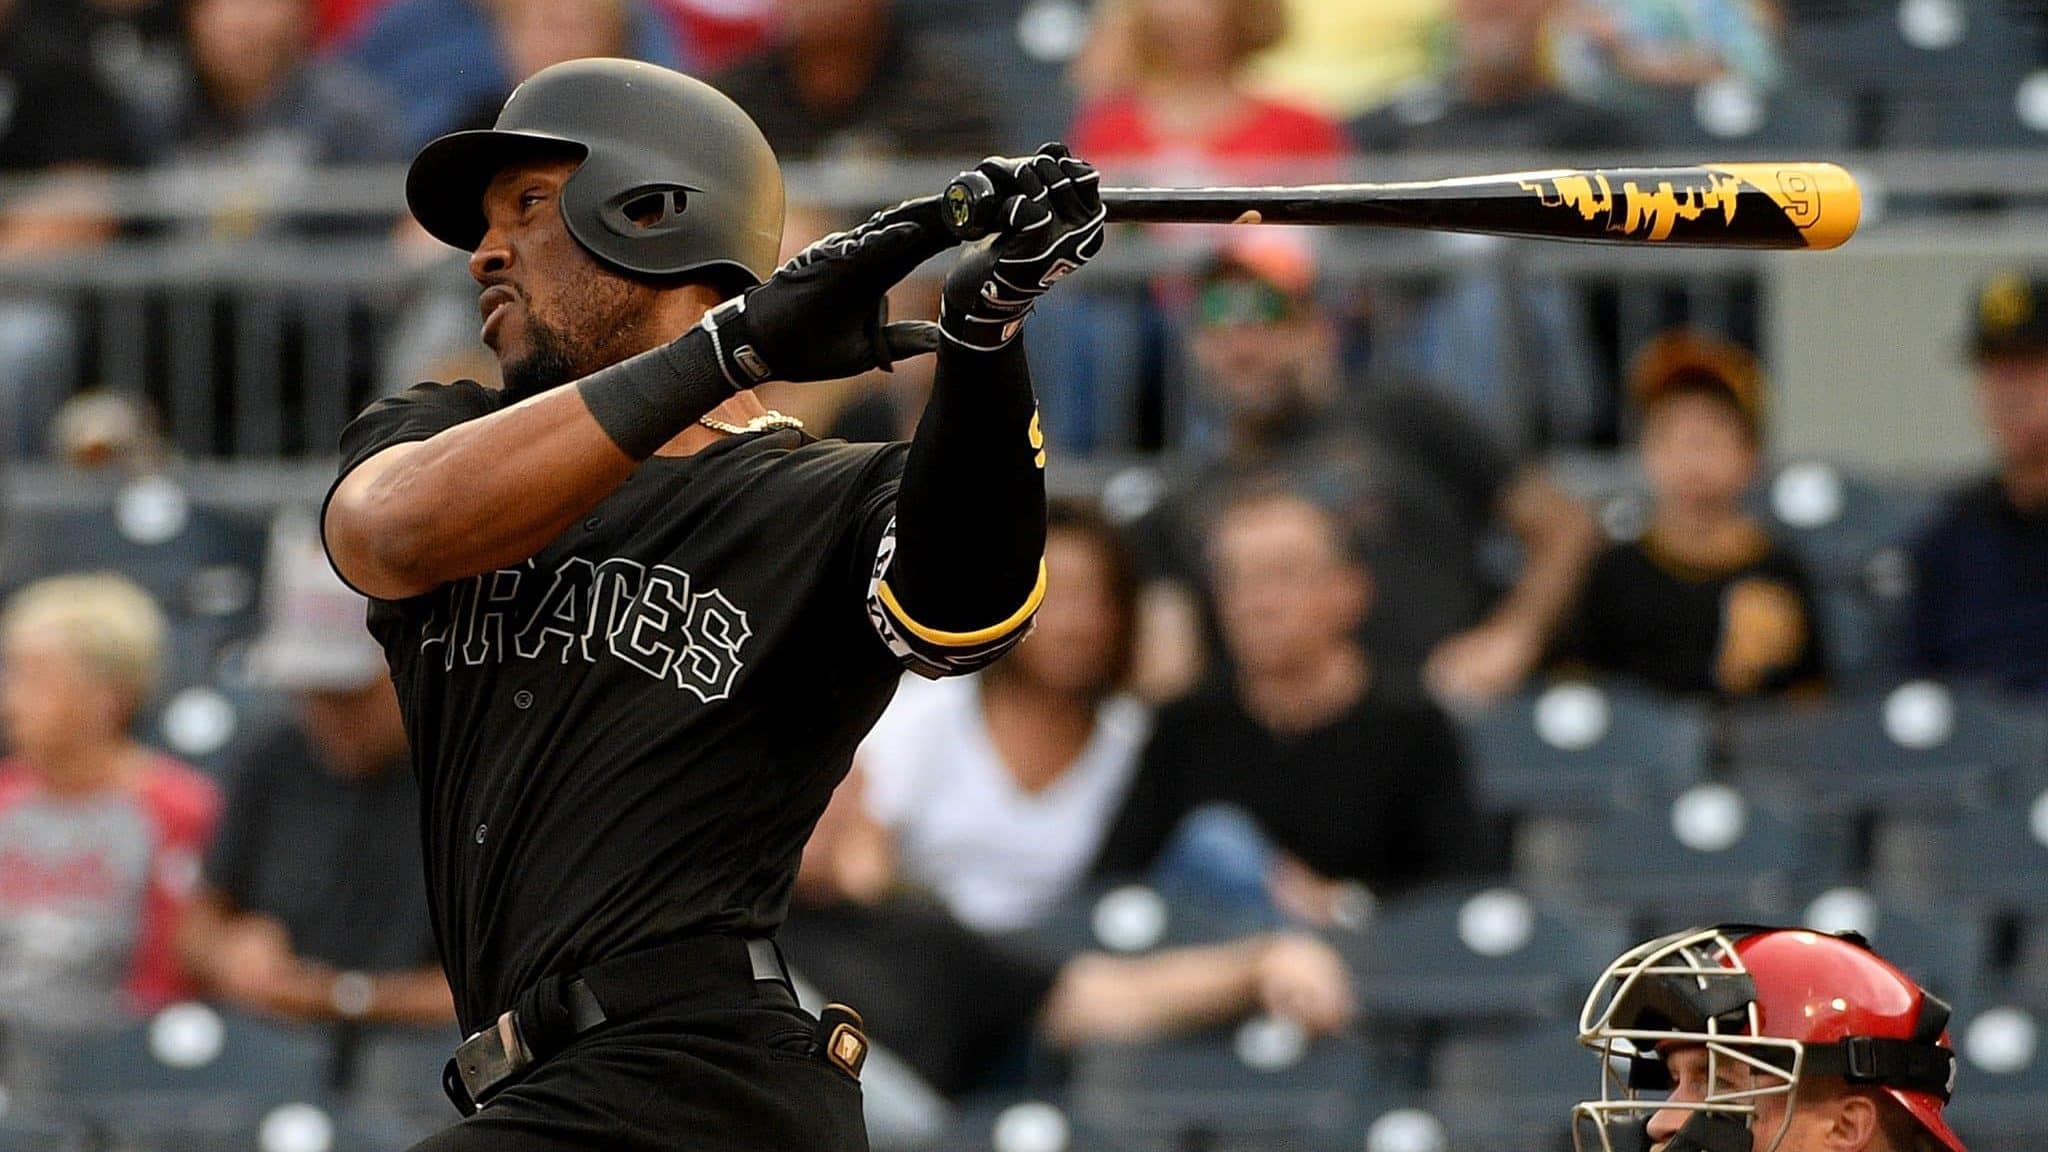 PITTSBURGH, PA - AUGUST 23: Starling Marte #6 of the Pittsburgh Pirates hits a single to center field in the first inning during the game against the Cincinnati Reds at PNC Park on August 23, 2019 in Pittsburgh, Pennsylvania. Teams are wearing special color schemed uniforms with players choosing nicknames to display for Players' Weekend.